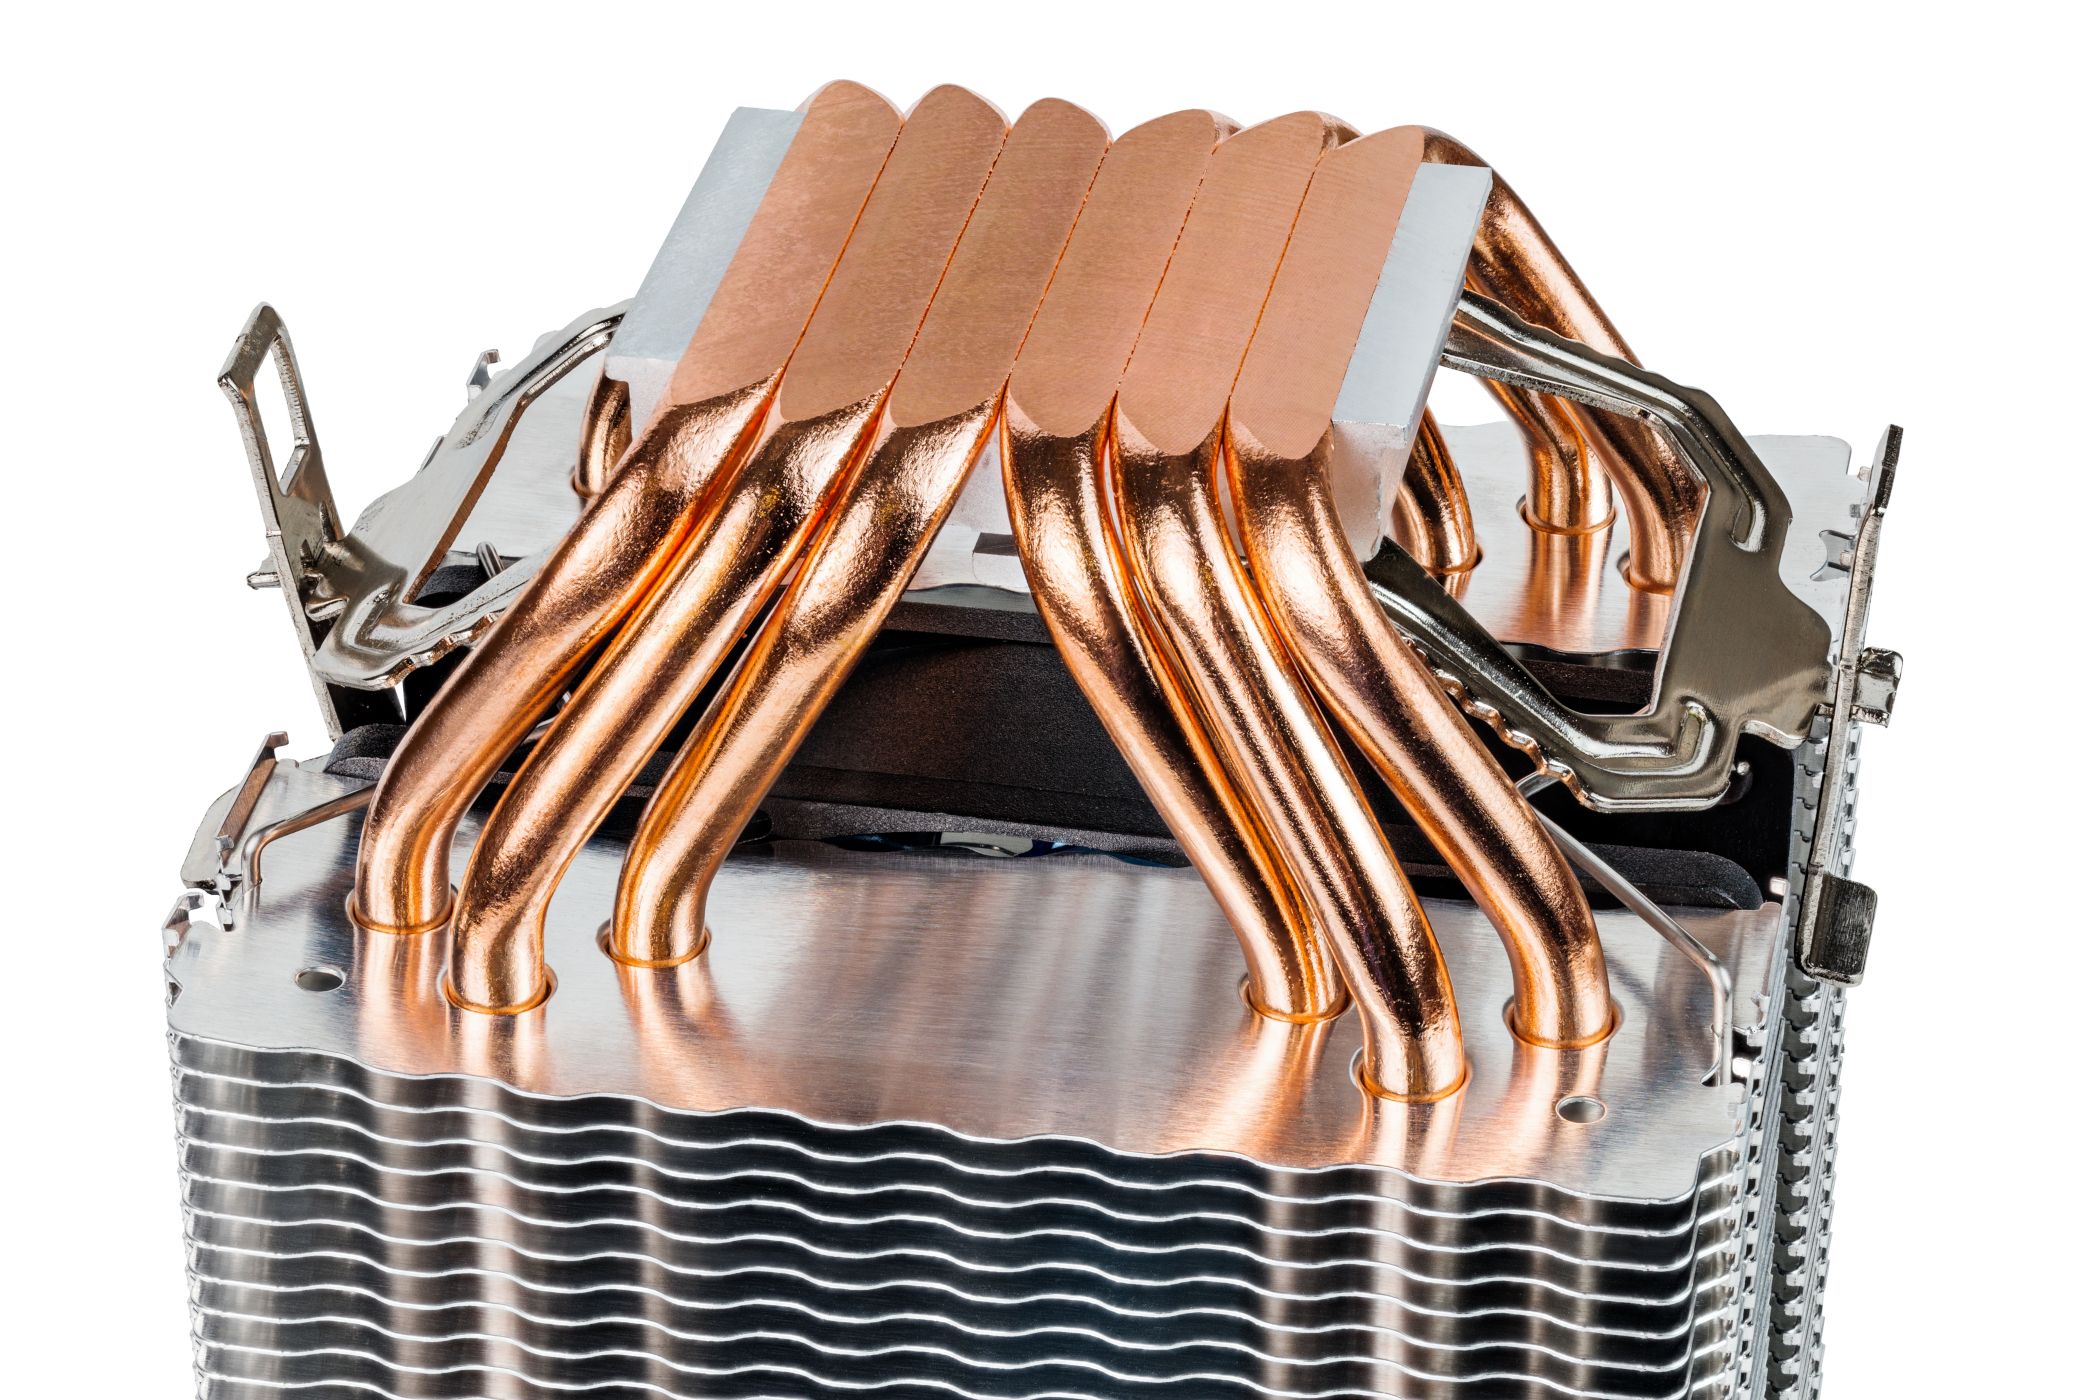 The bottom side of a CPU air cooler with six copper heat pipes against a white background.